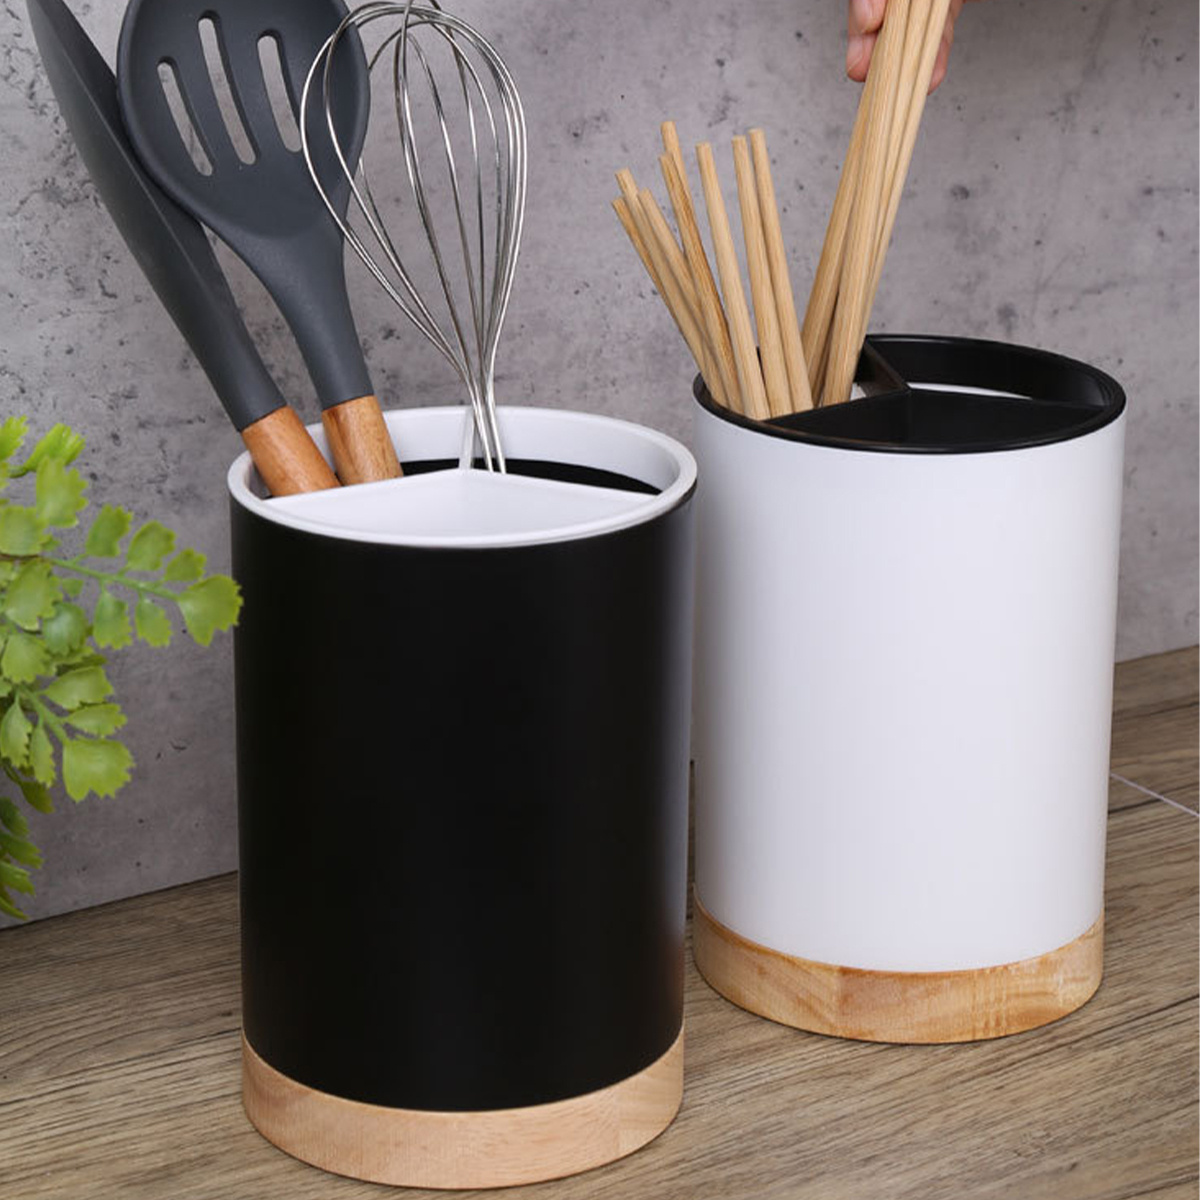 

Durable Utensil Holder With Detachable 3 Divided Silverware Holder - Perfect Kitchen Tableware Storage Solution For Chopsticks, Spoons, And Flatware